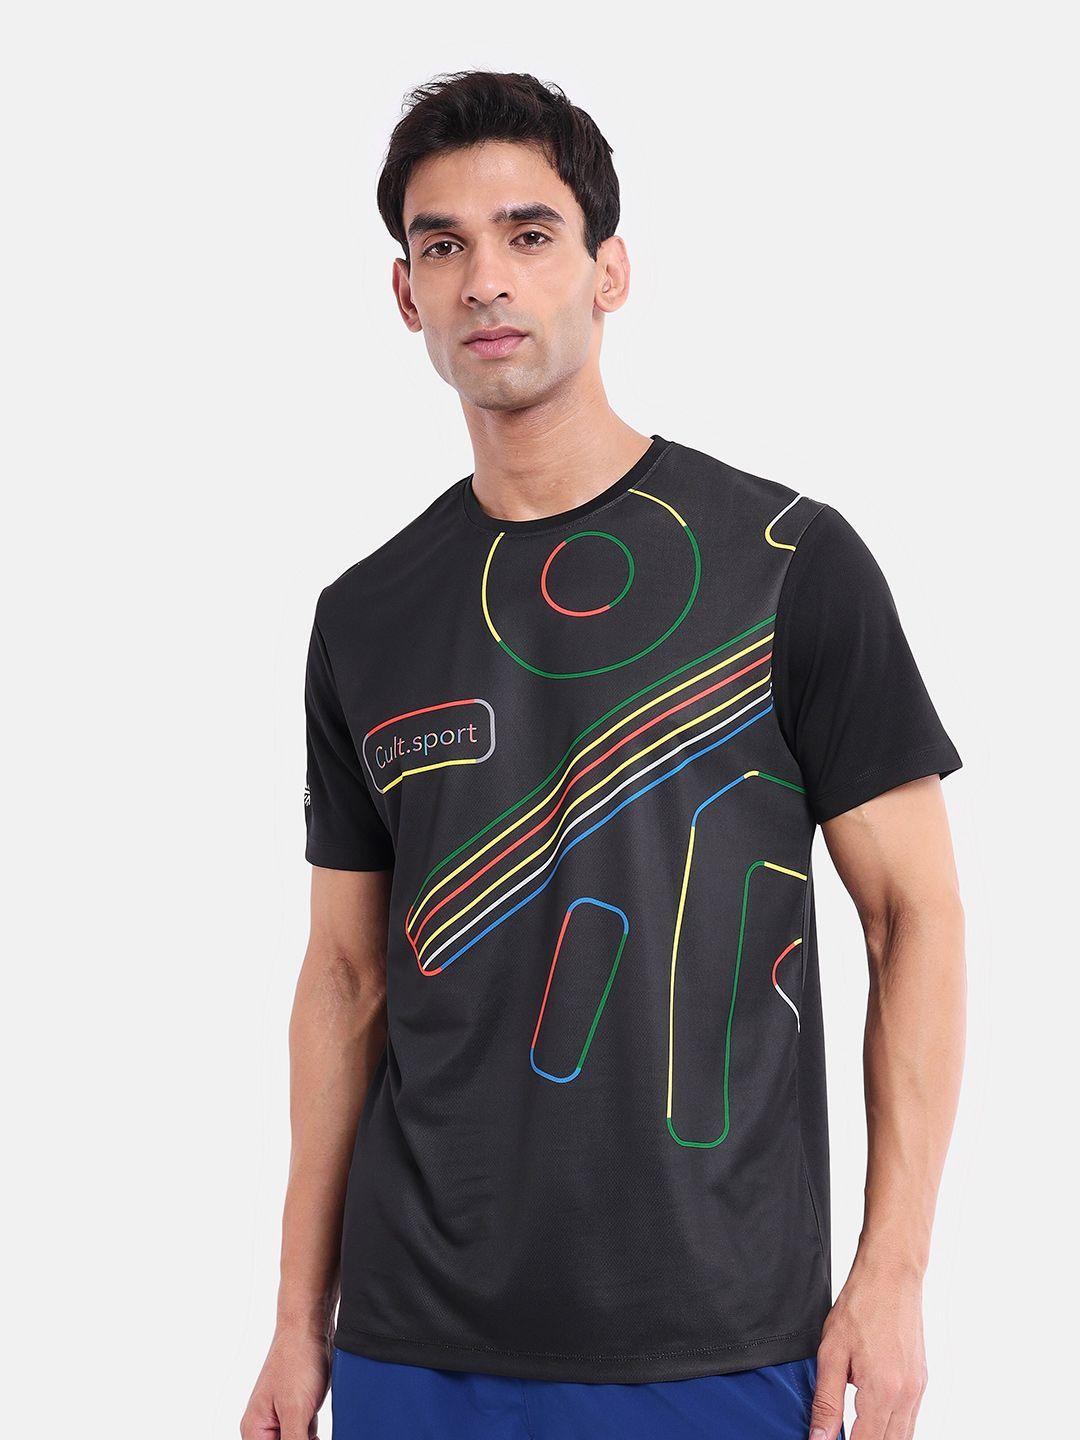 cultsport-abstract-printed-moisture-wicking-t-shirt